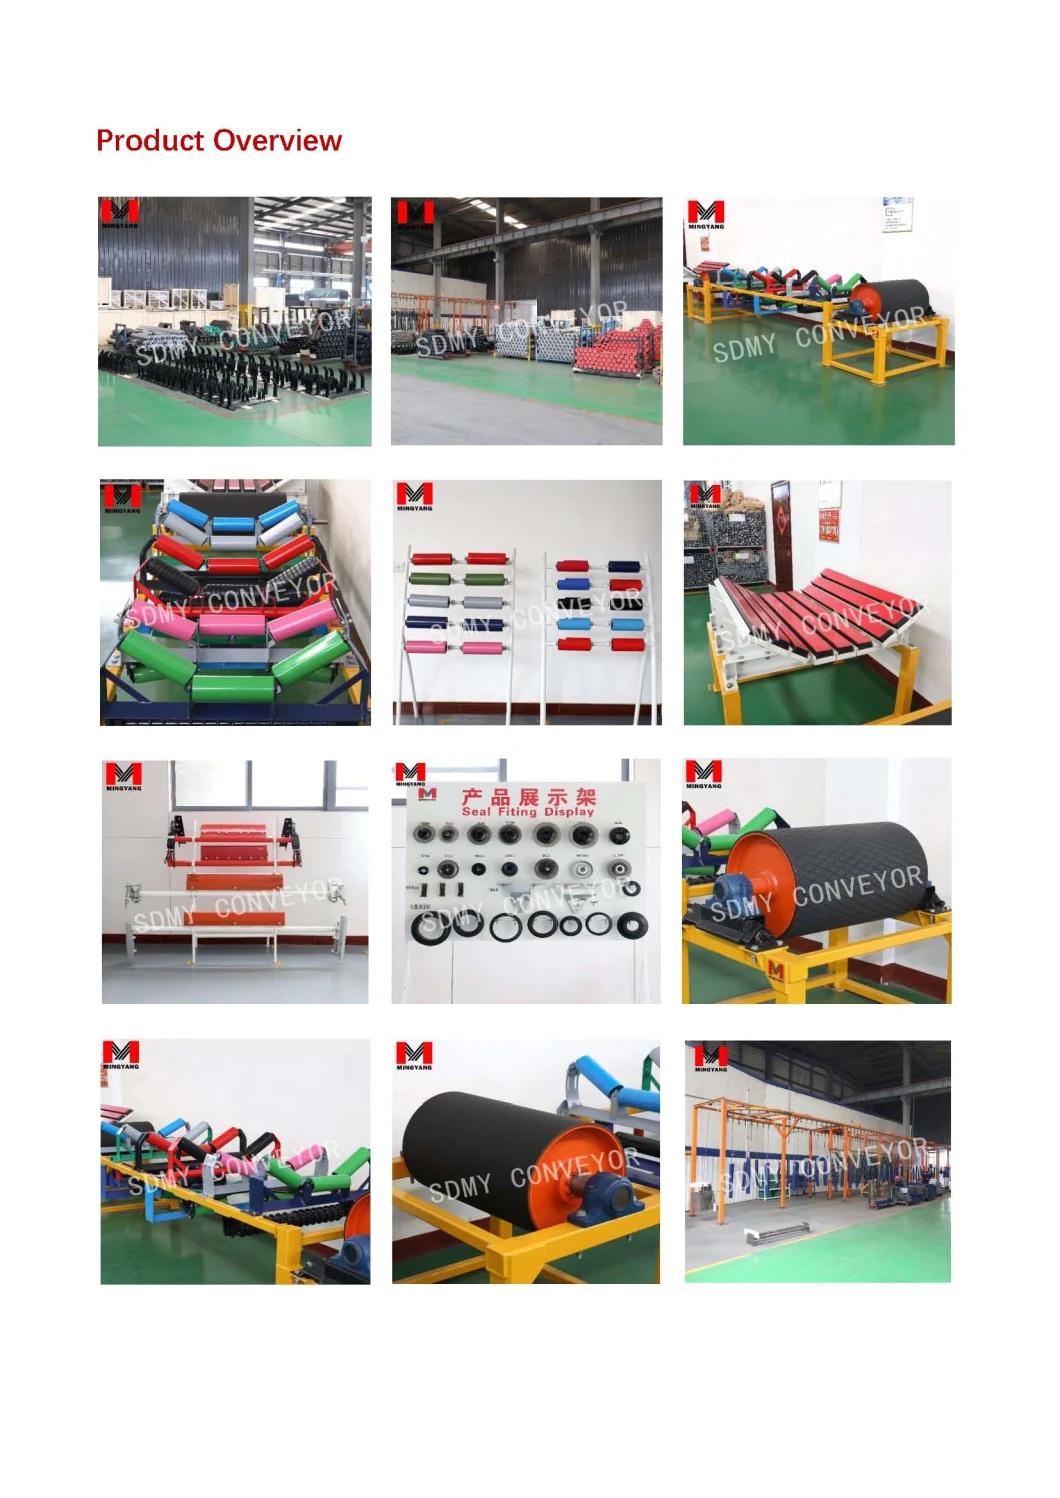 Stainless Steel Inline Trough Frame Carrying Frame of Belt Conveyor System